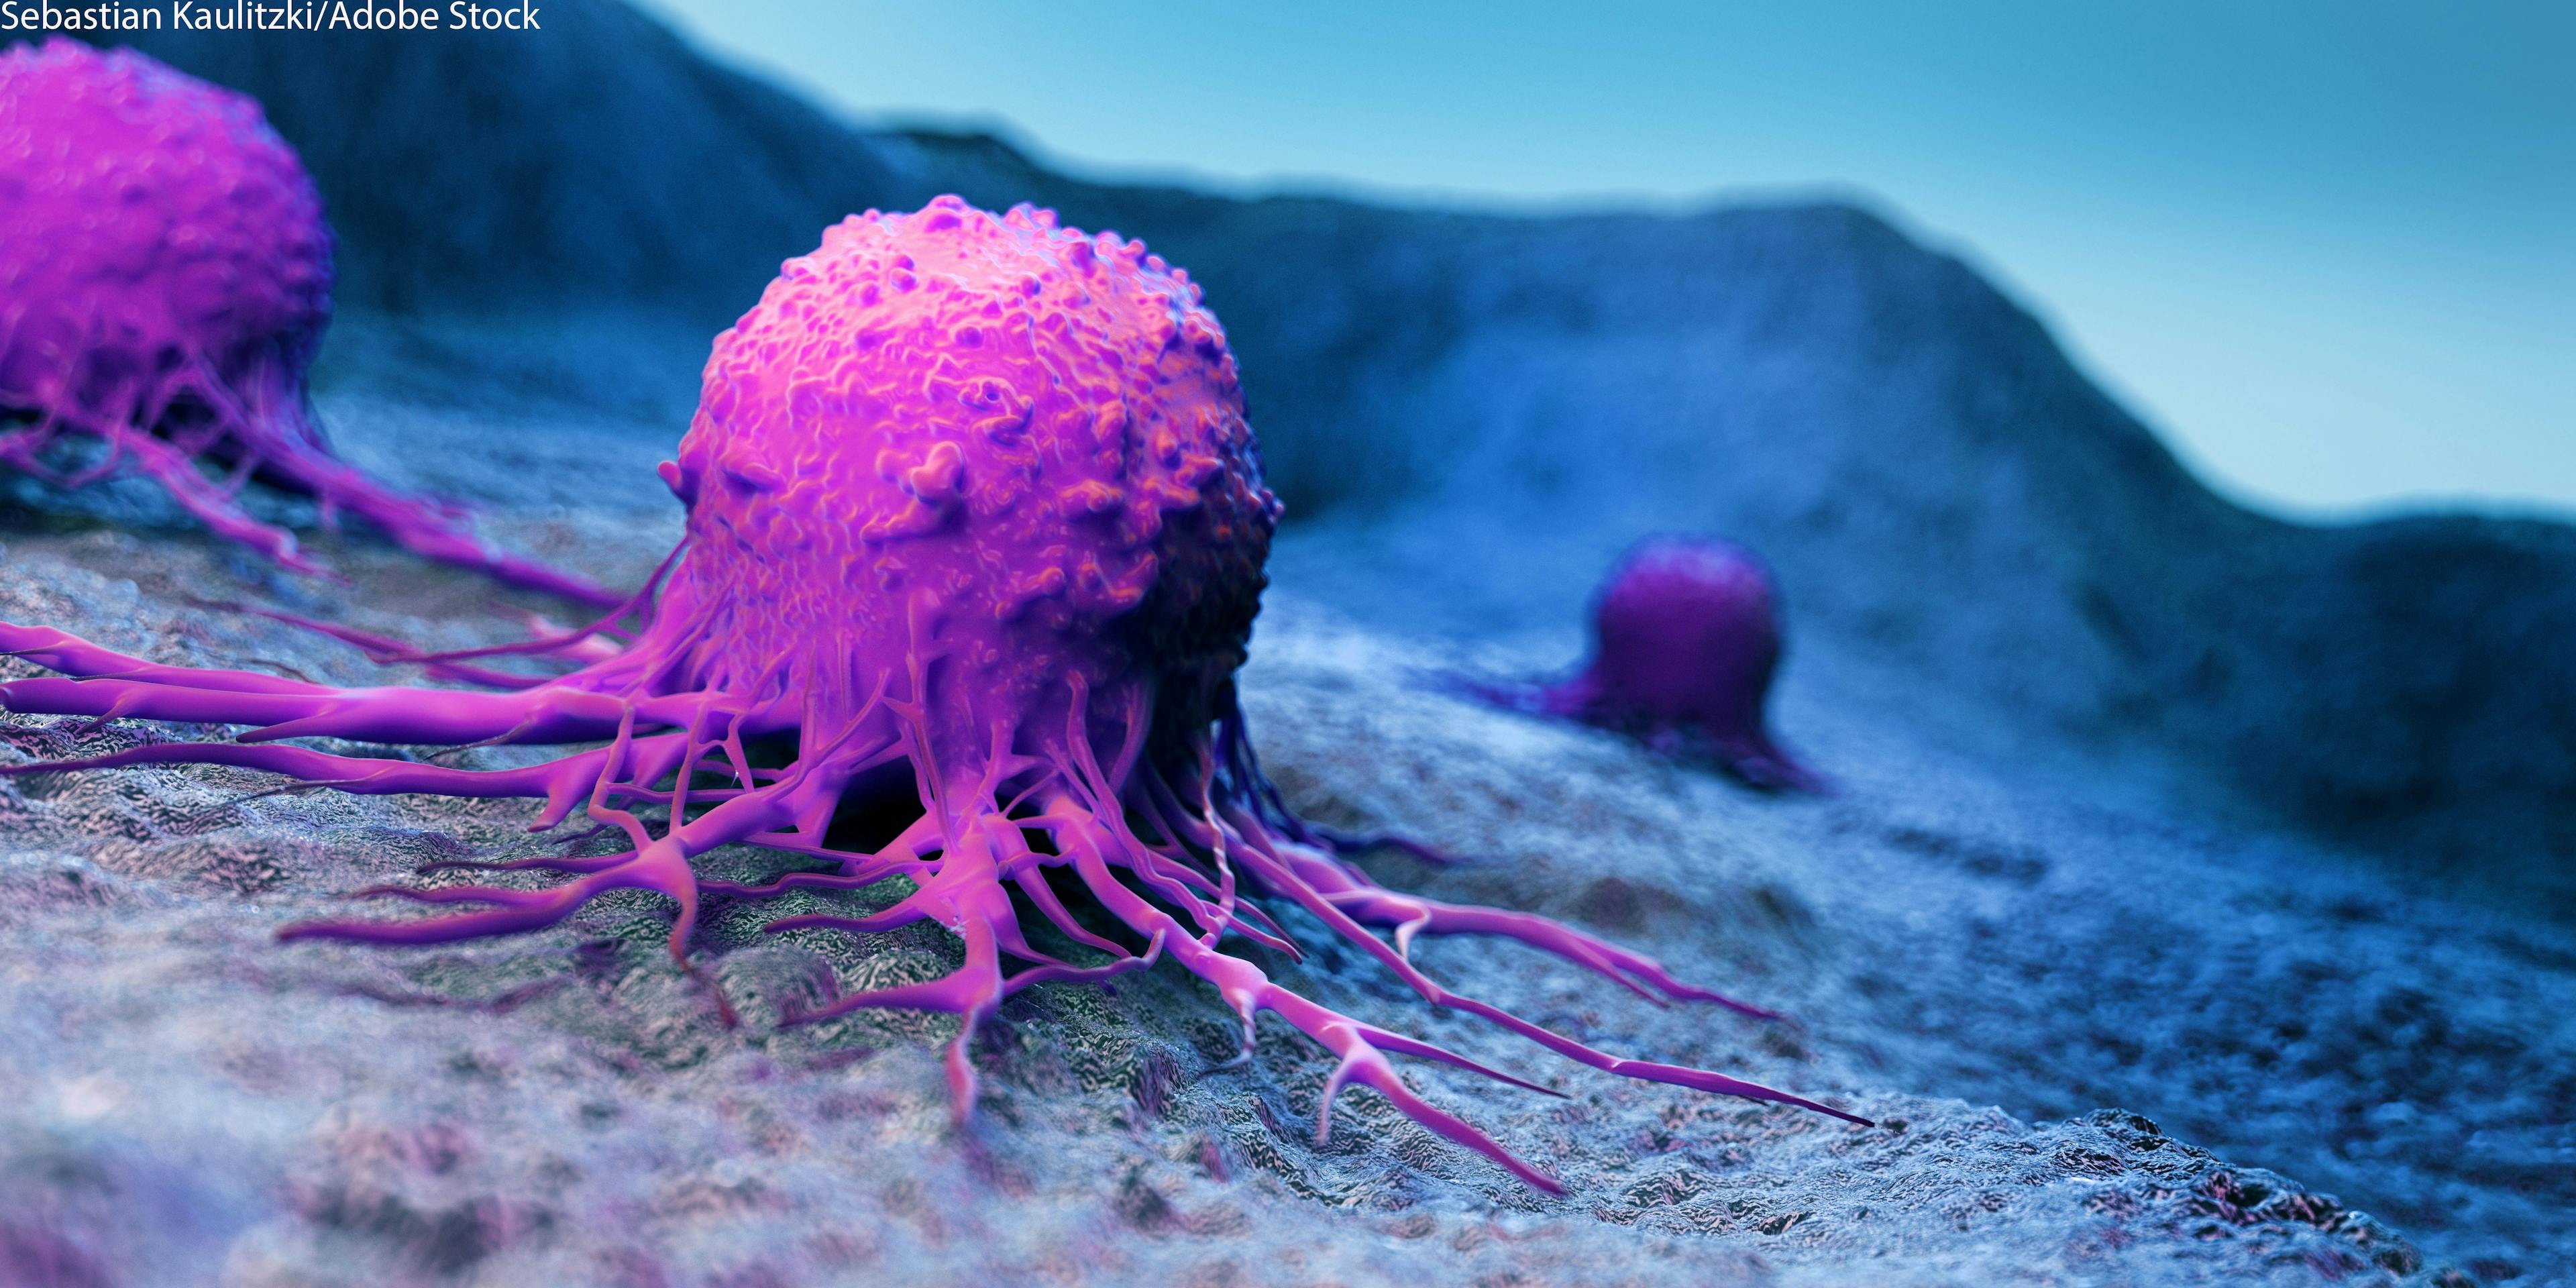 T-DXd Yields Meaningful Survival Outcomes in HER2+ Advanced Solid Tumors | Image Credit: © Sebastian Kaulitzki - stock.adobe.com.